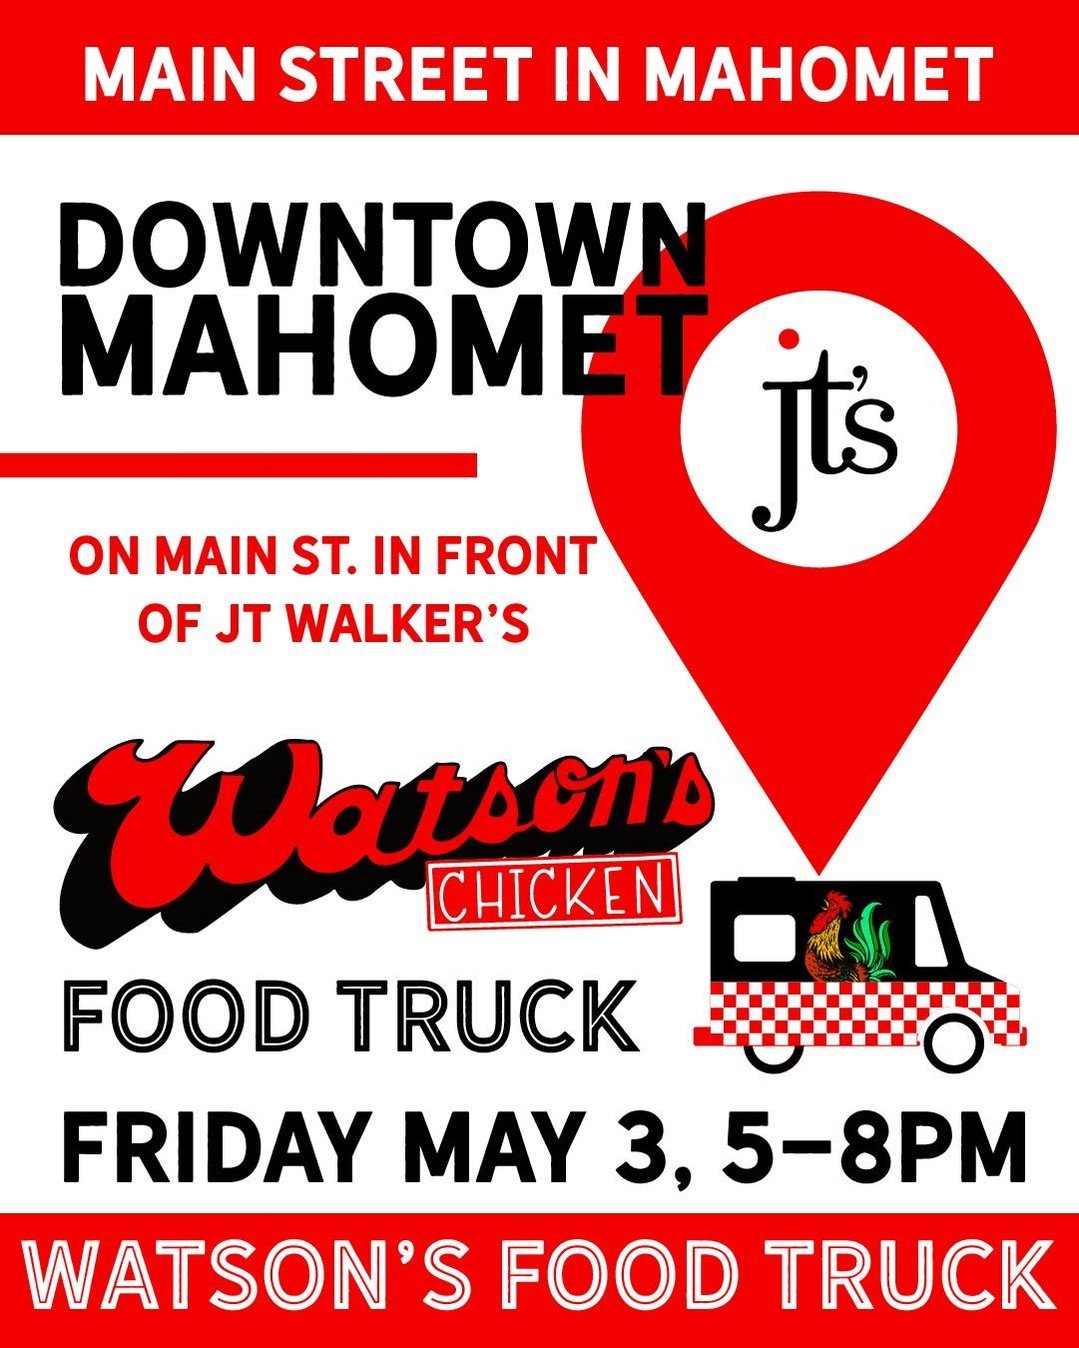 Mahomet, we're coming to a downtown near you! We'll be on Main St near @jtwalkers Friday evening from 5-8!